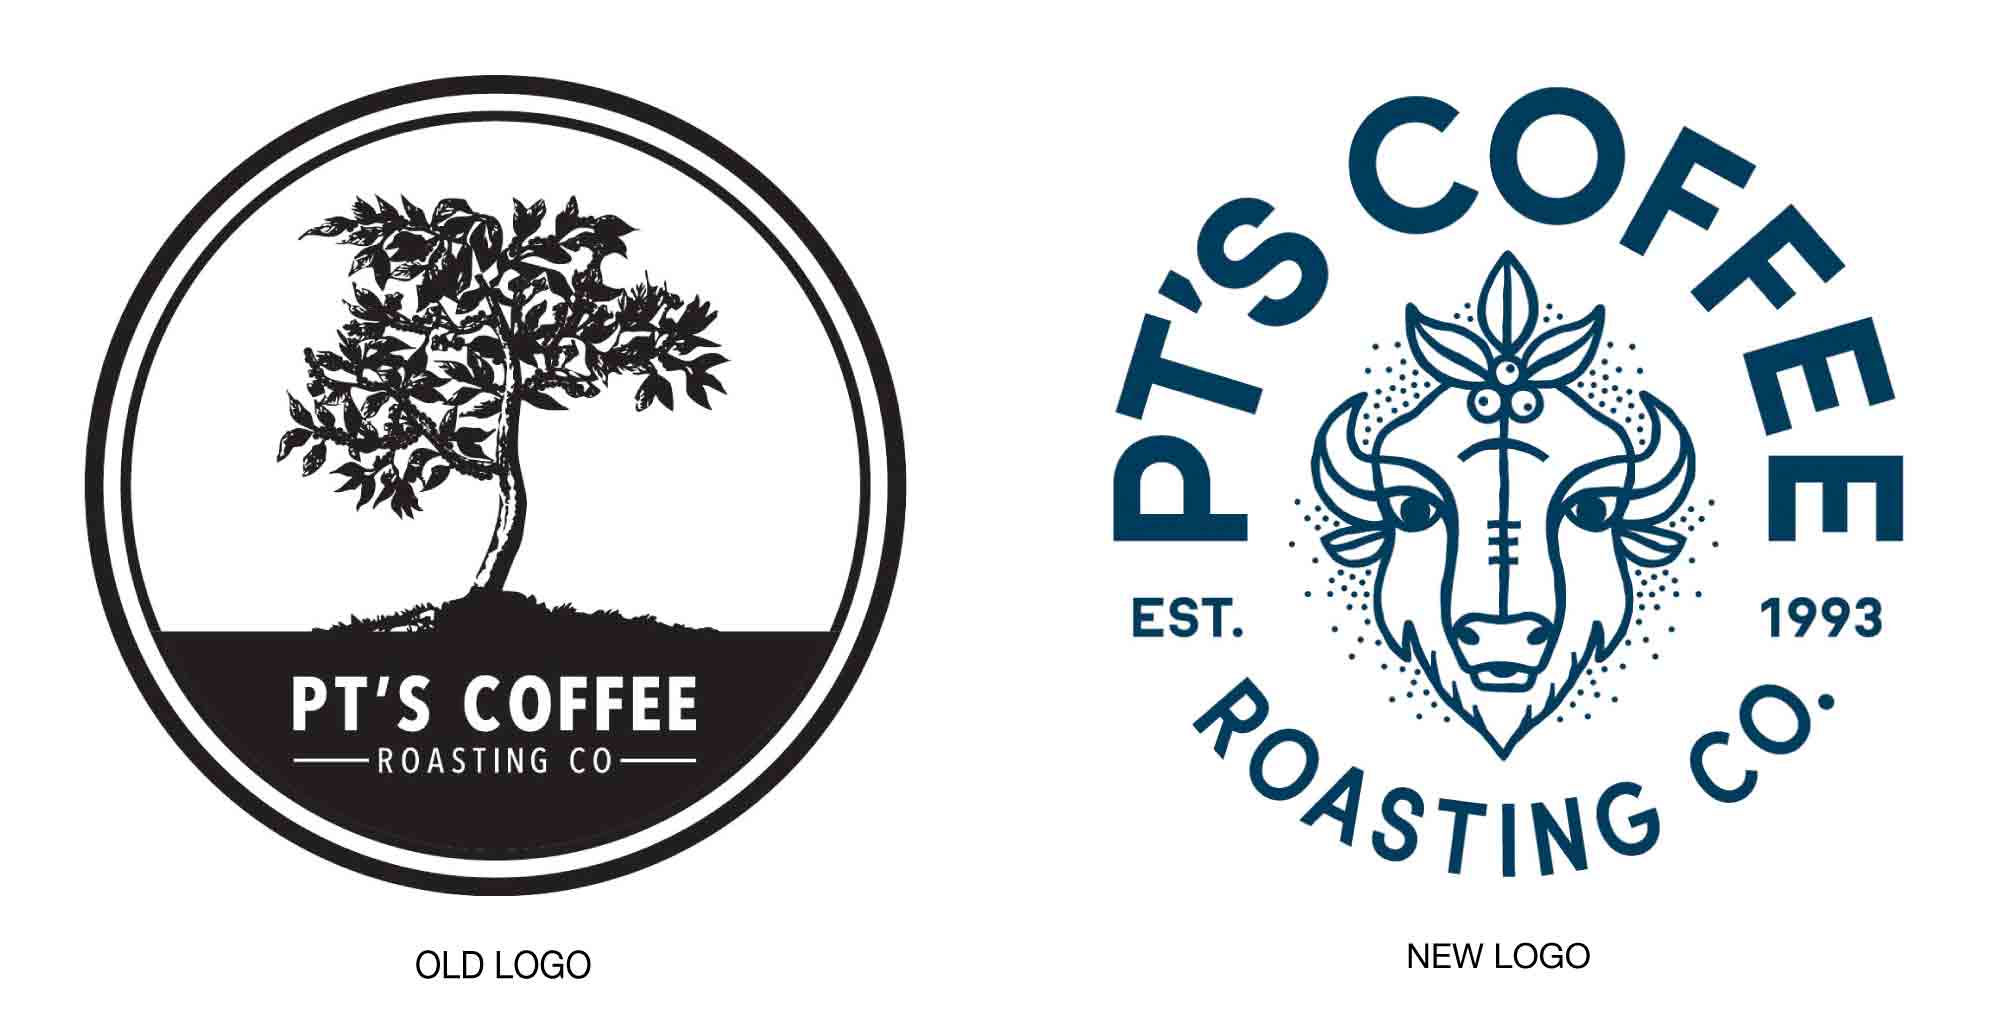 Popular Coffee Logo - New Identity for PT's Coffee Roasting Co. | Articles | LogoLounge